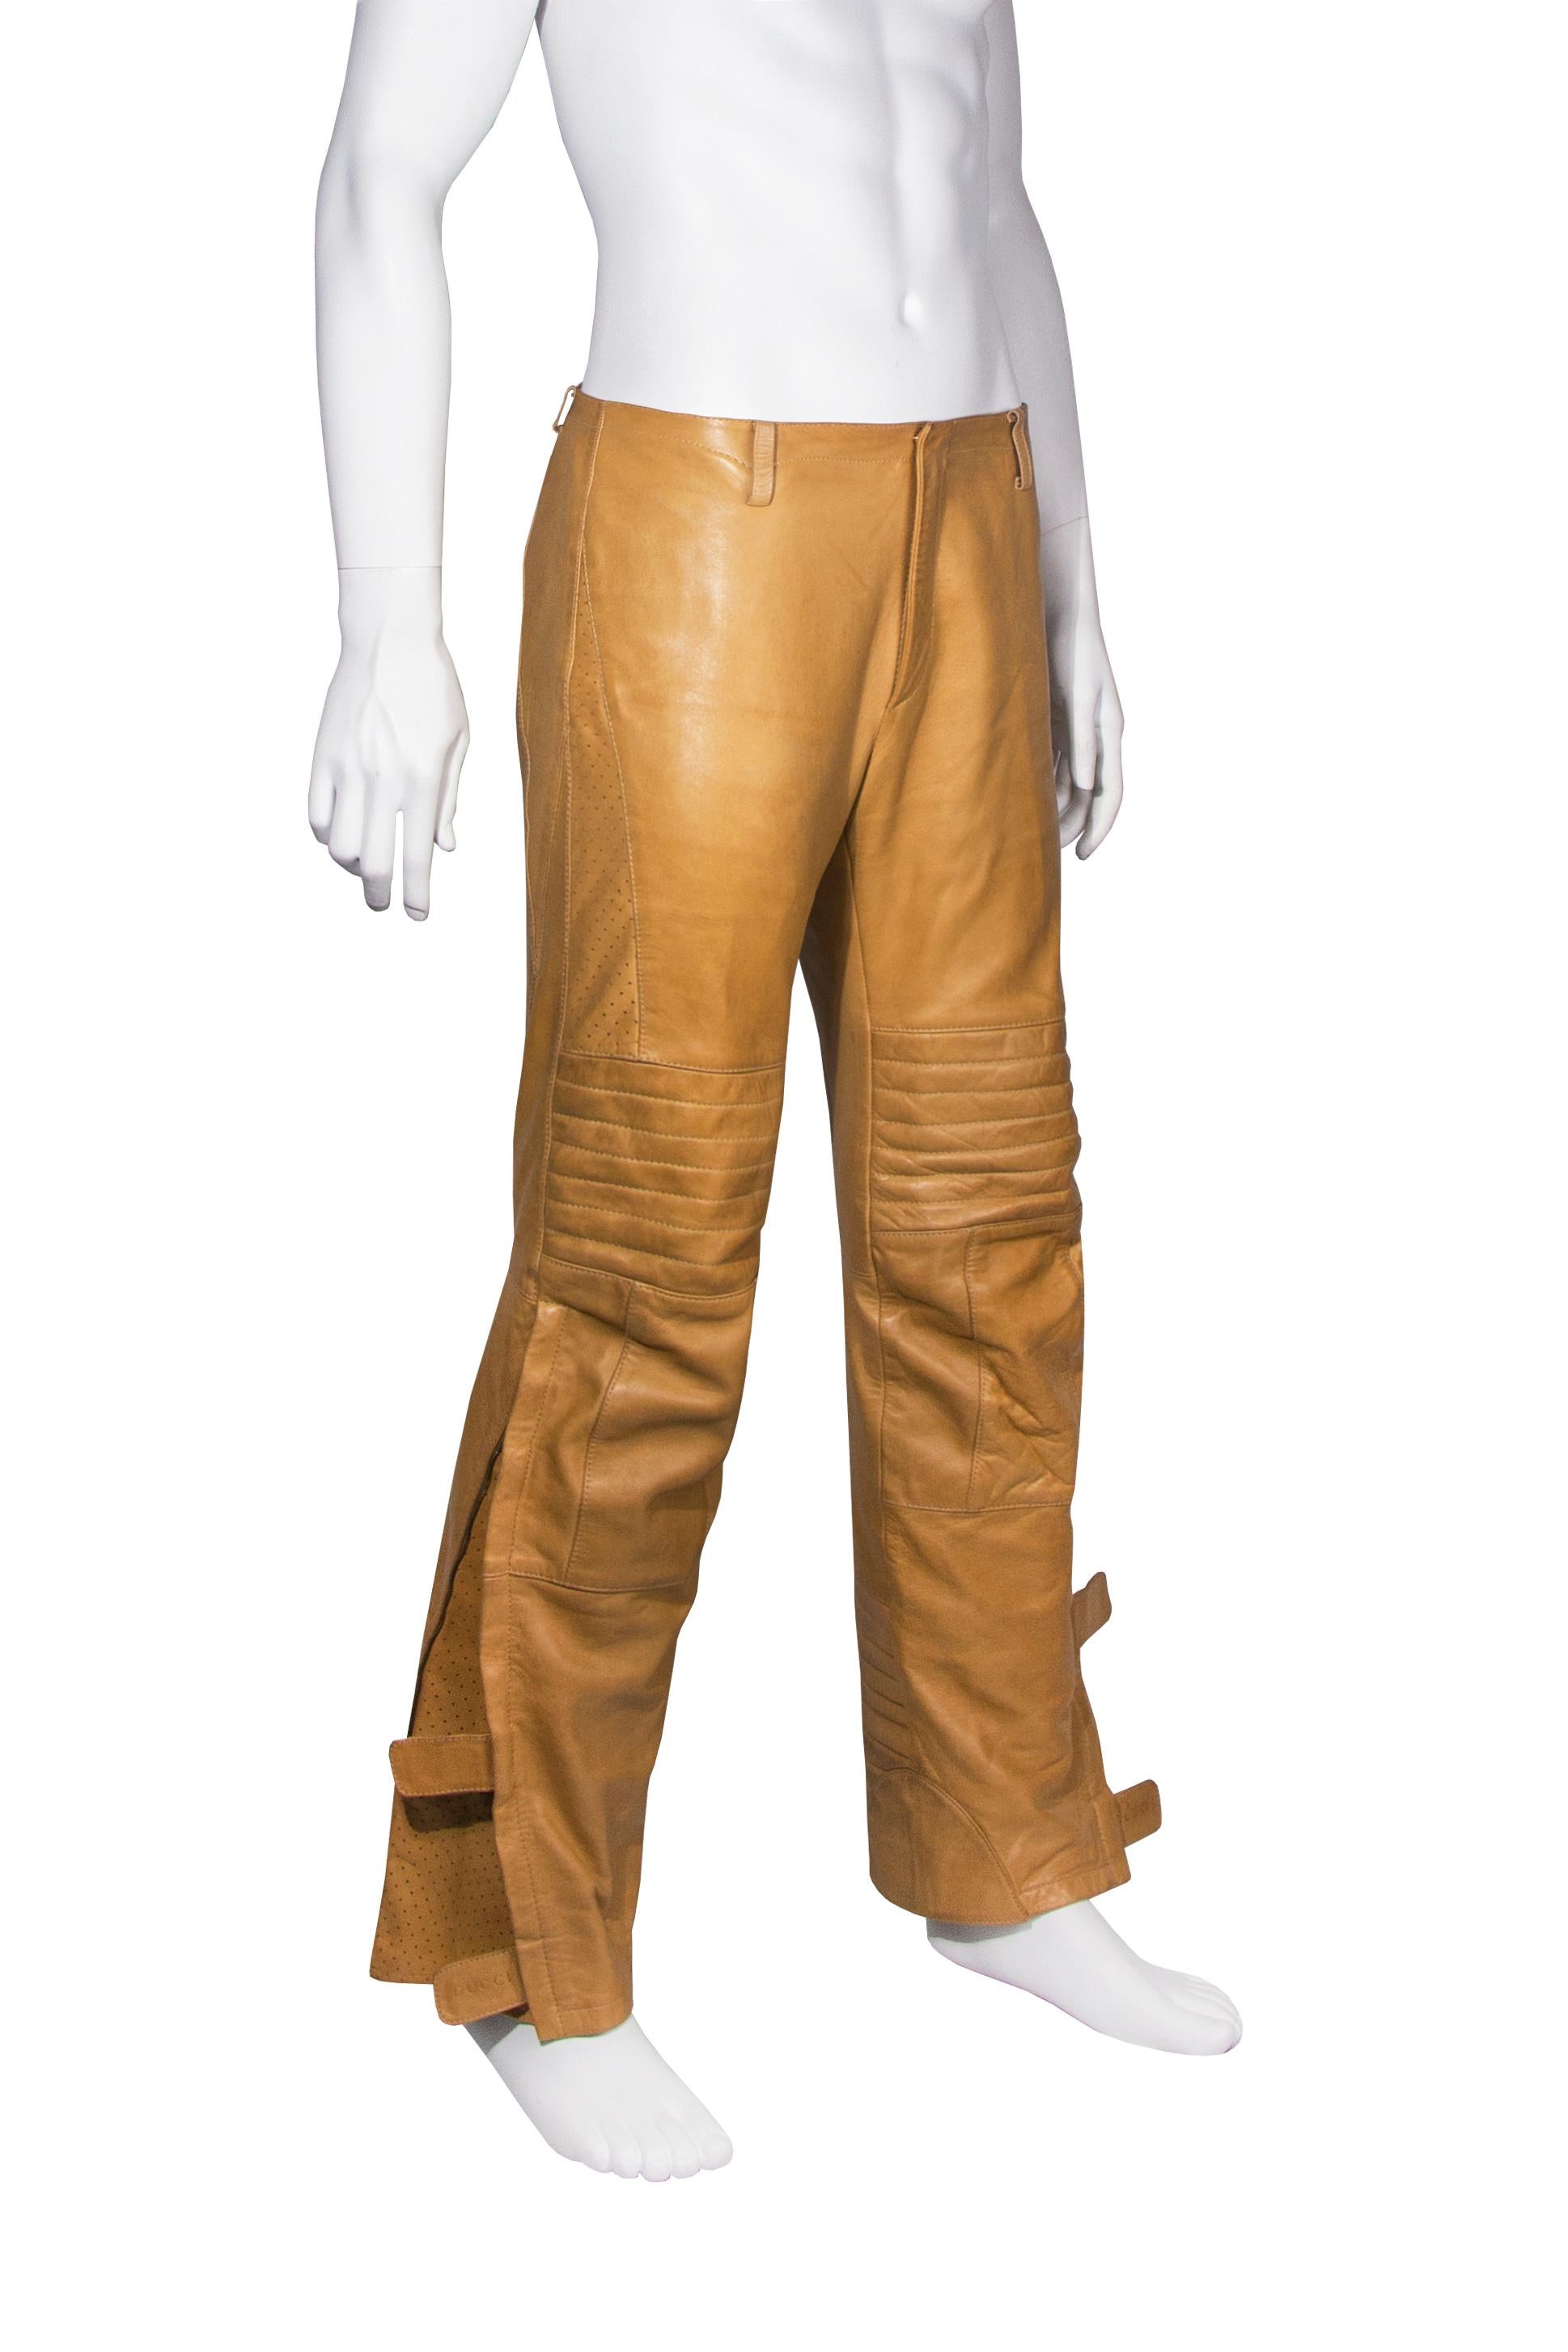 Men's Gucci by Tom Ford men's tan leather motorcycle pants, fw 2000 For Sale